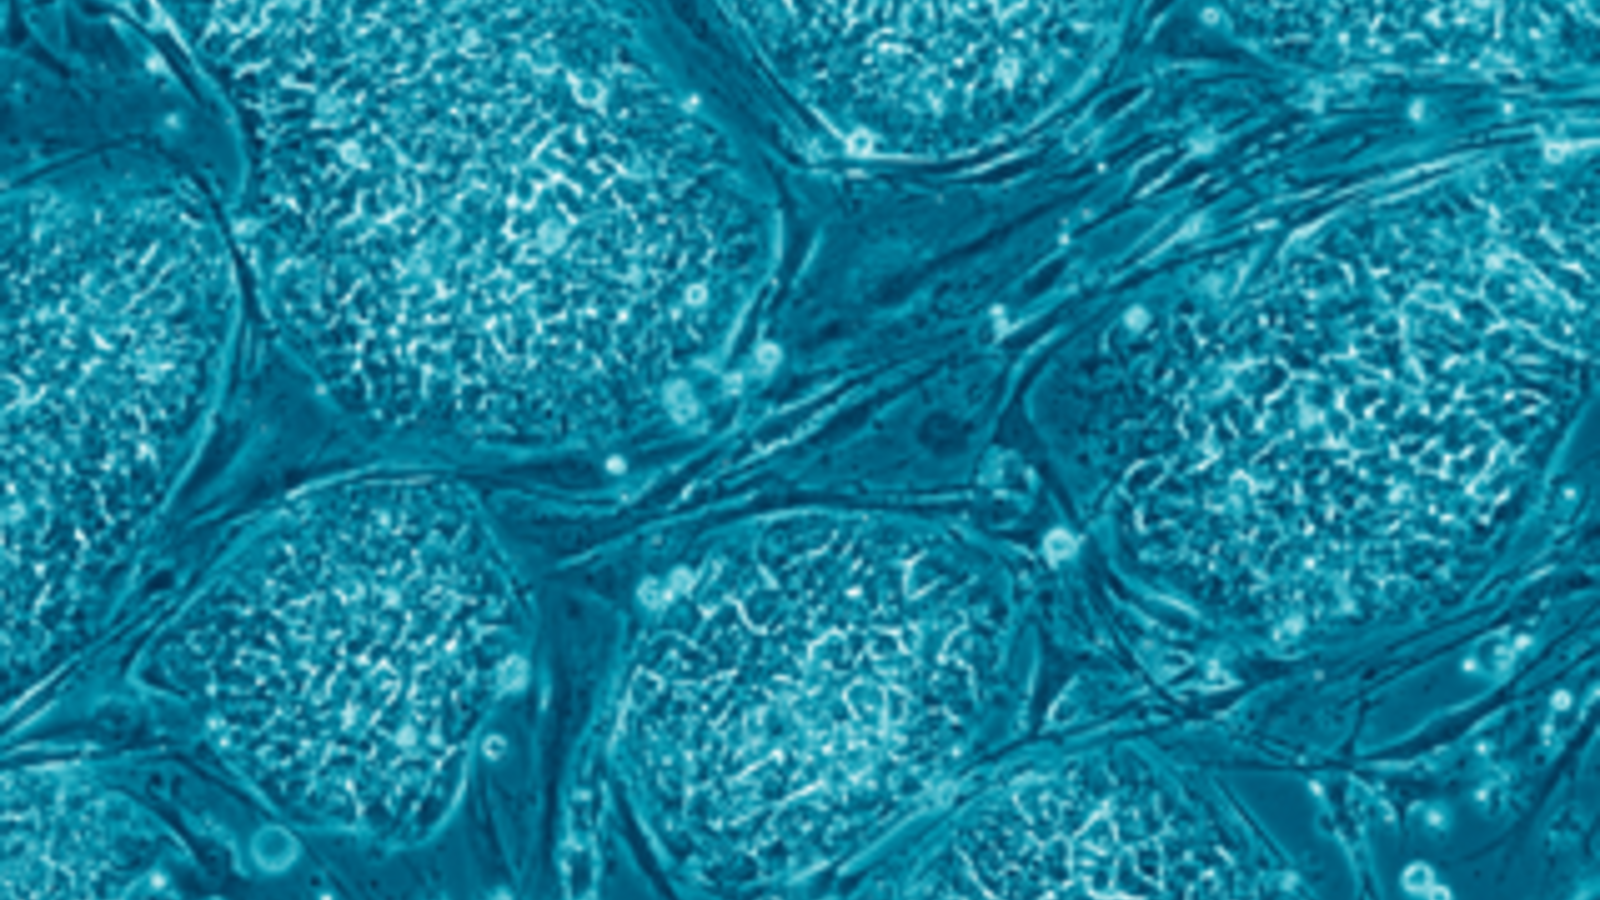 319px-human_embryonic_stem_cells.png